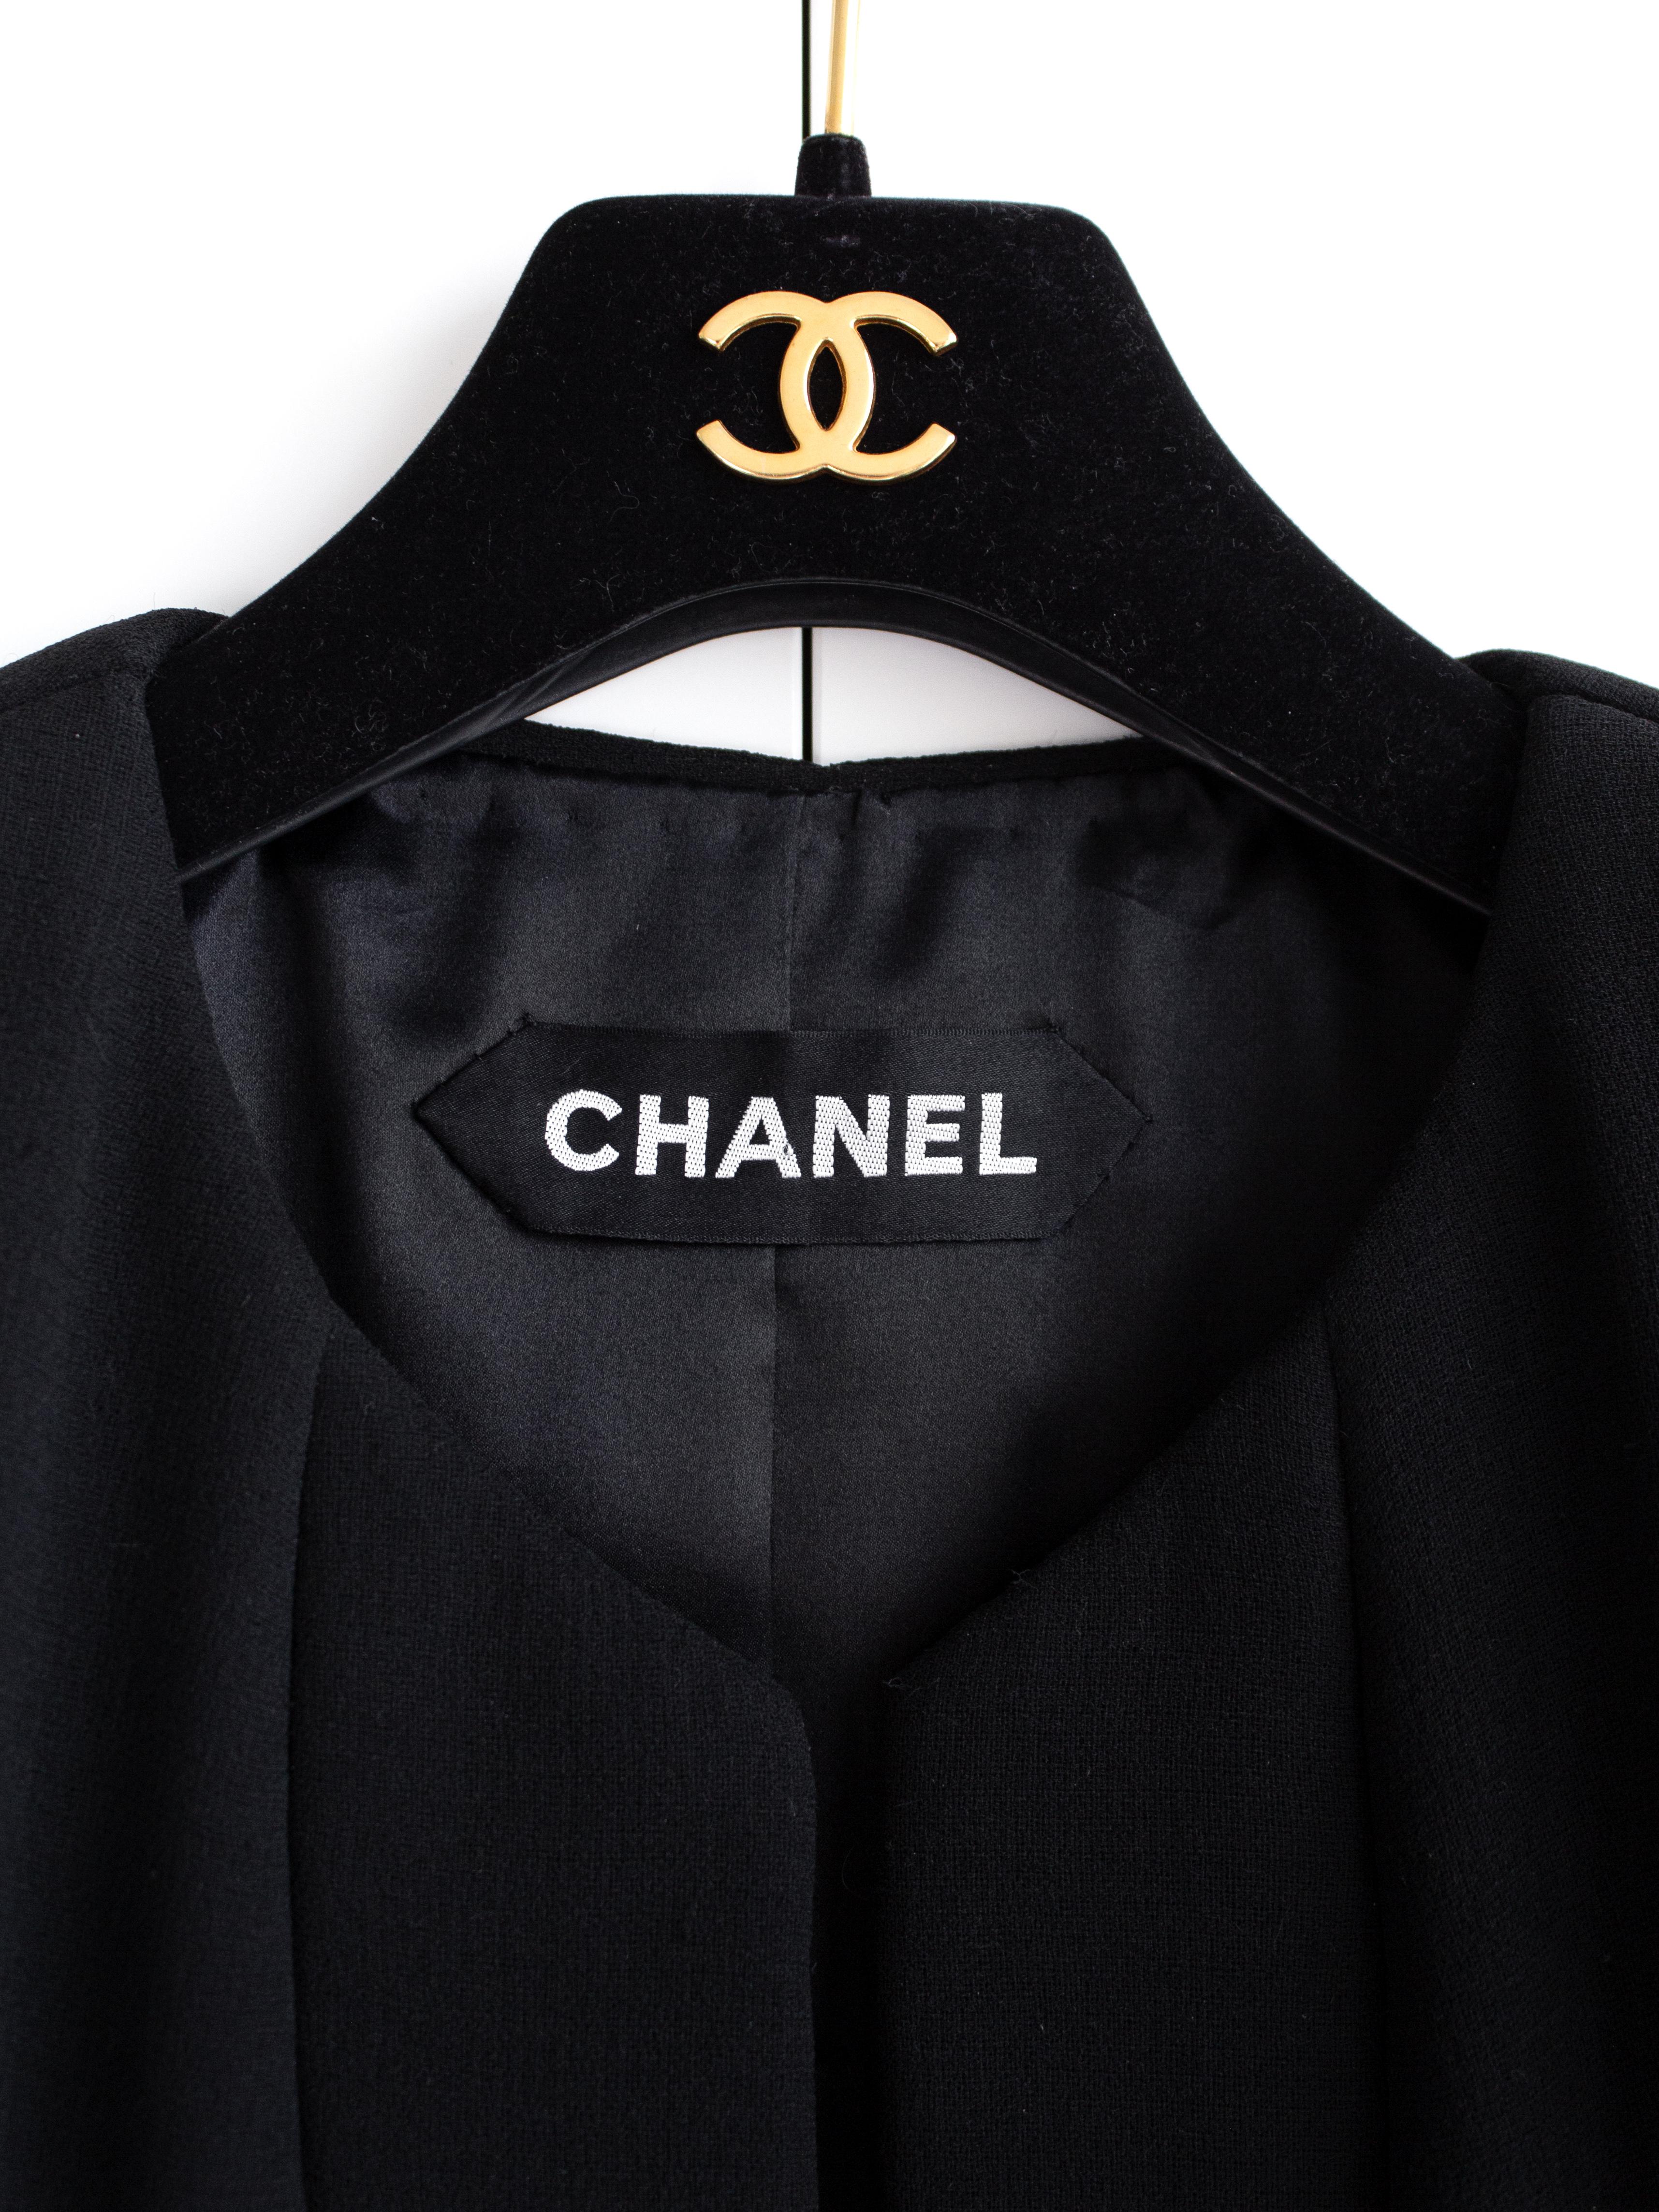 Chanel Haute Couture F/W 2004 LBJ Classic Black Collarless Jacket 2